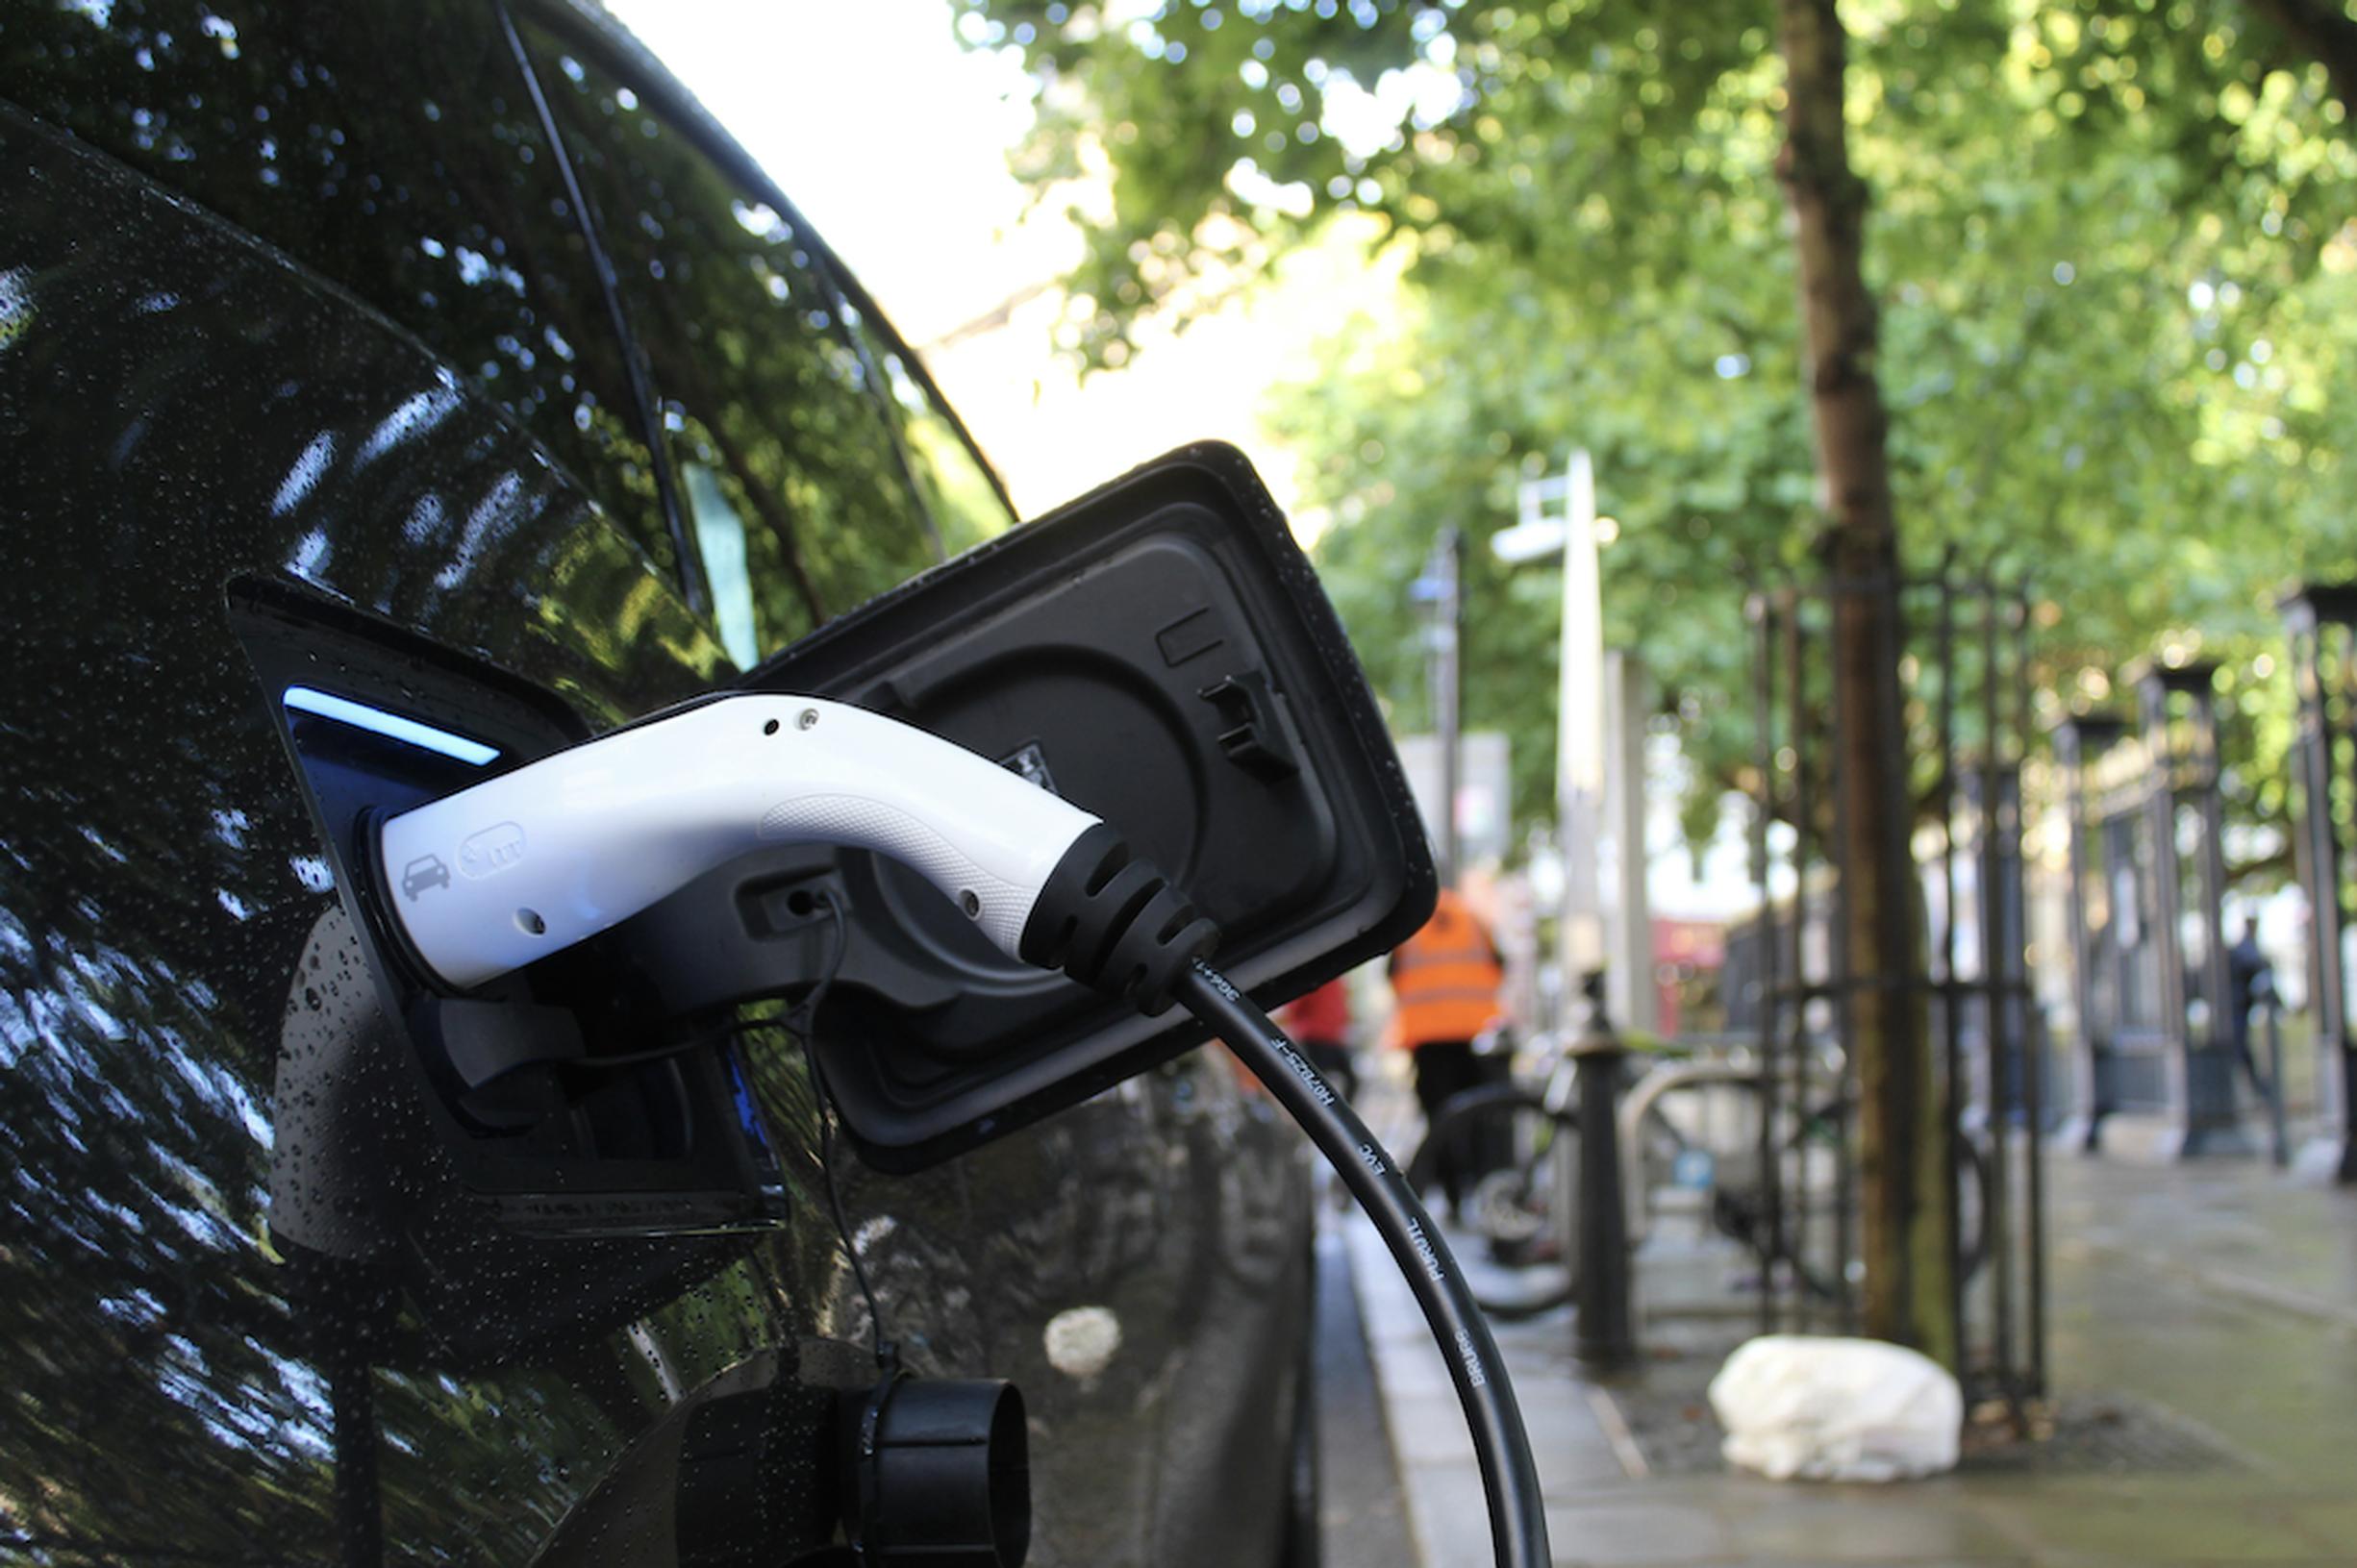 Taking Charge: On the Road to an EV Future report analyses driver data from 1.3 million vehicles across seven countries over 12 months